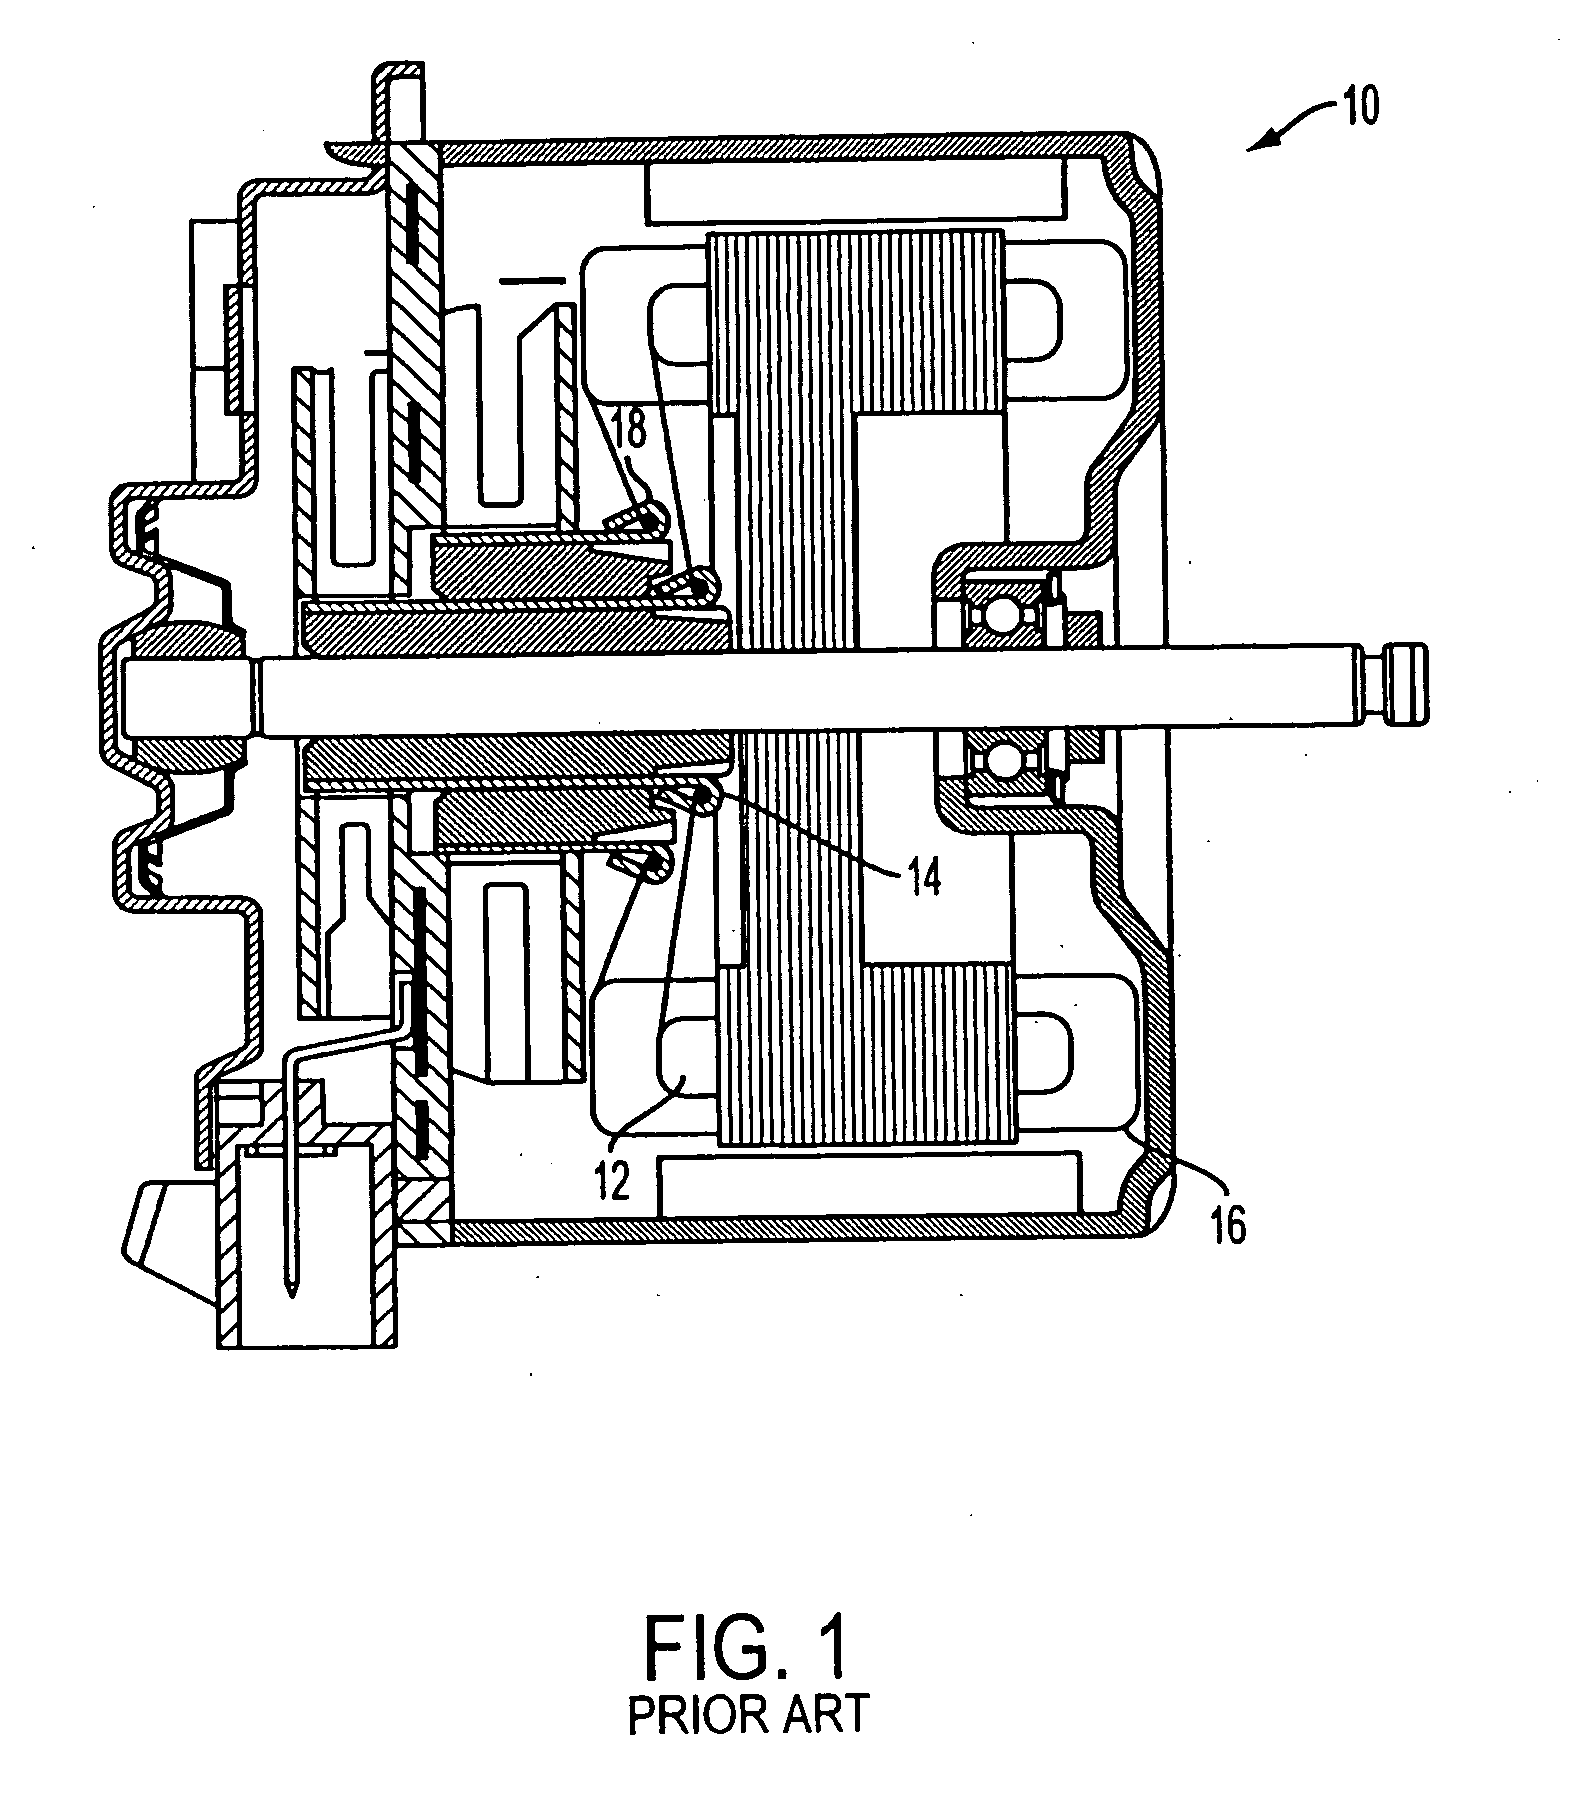 Two speed electric motor with link wound dual-commutator and dual-armature winding